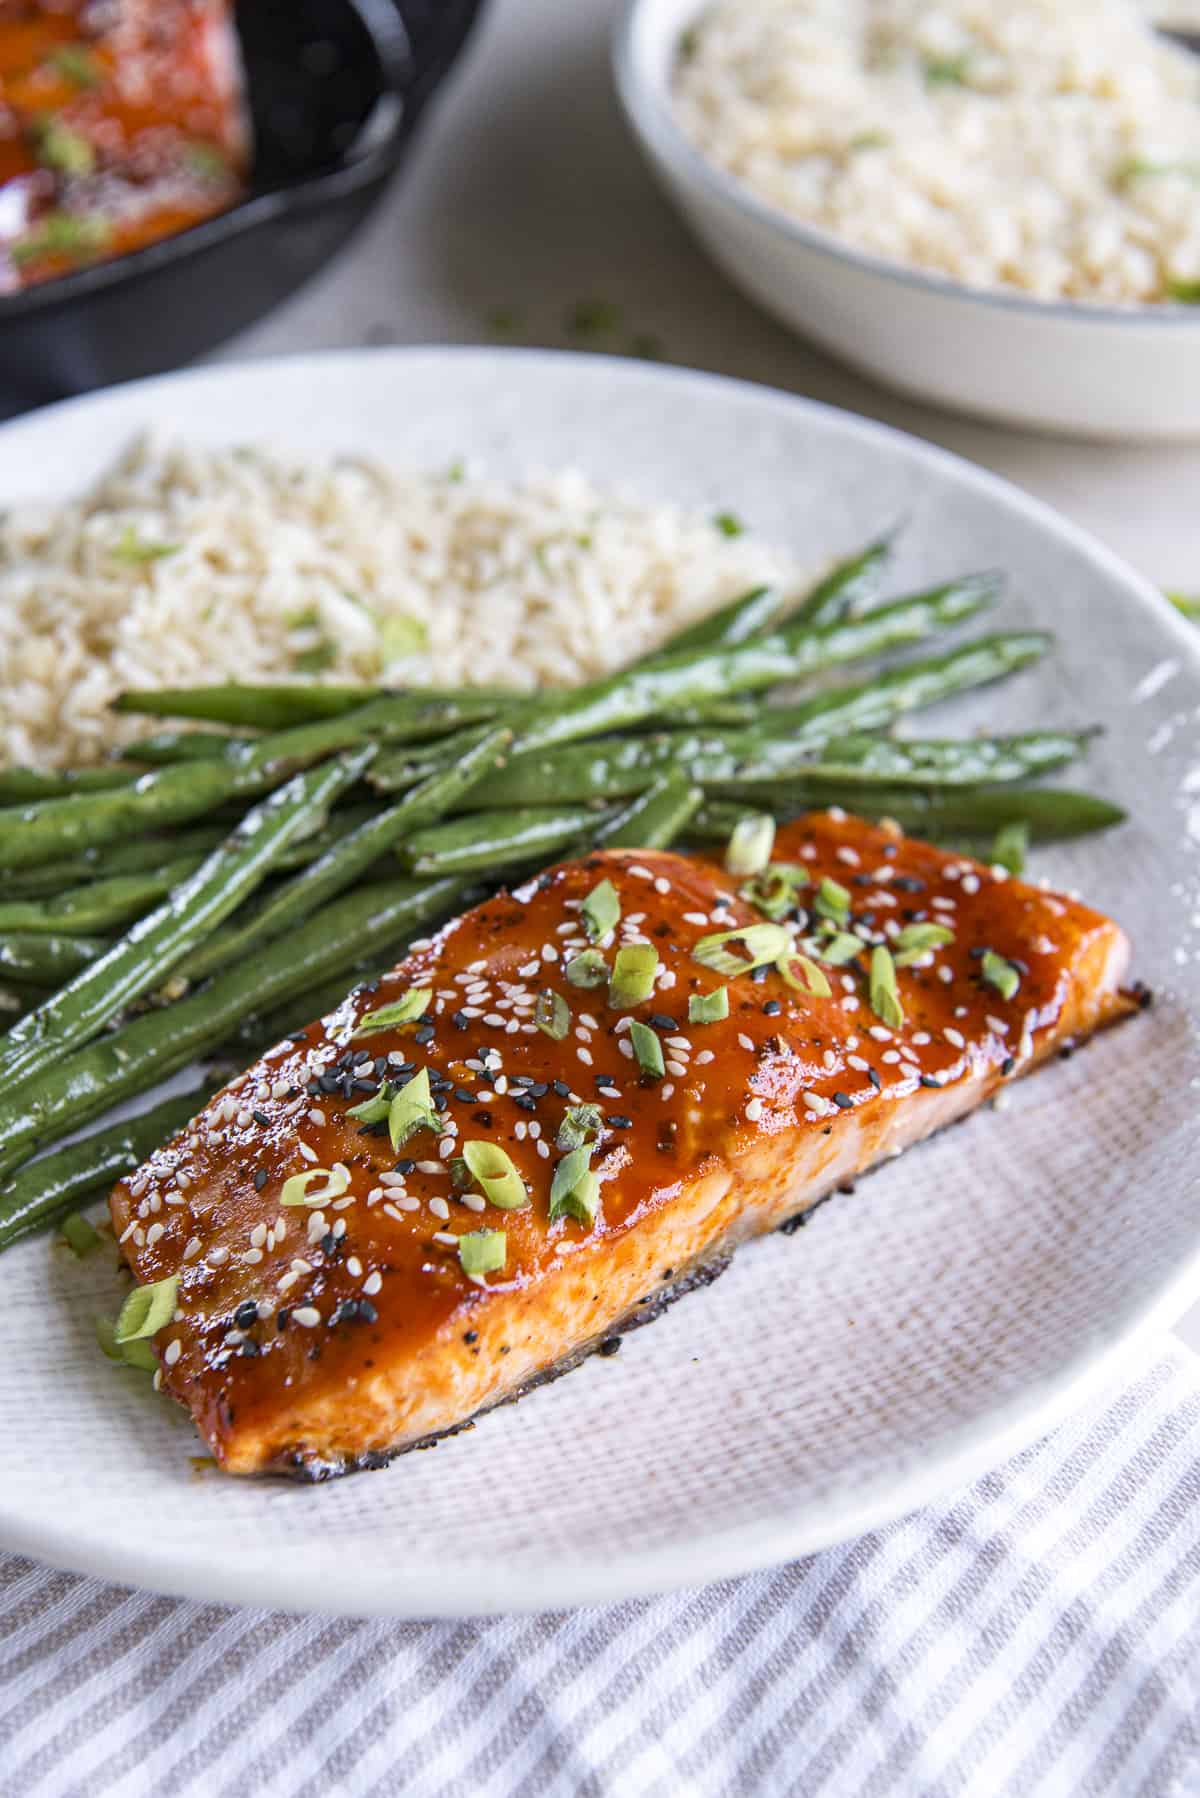 A plate with salmon, green beans and rice.